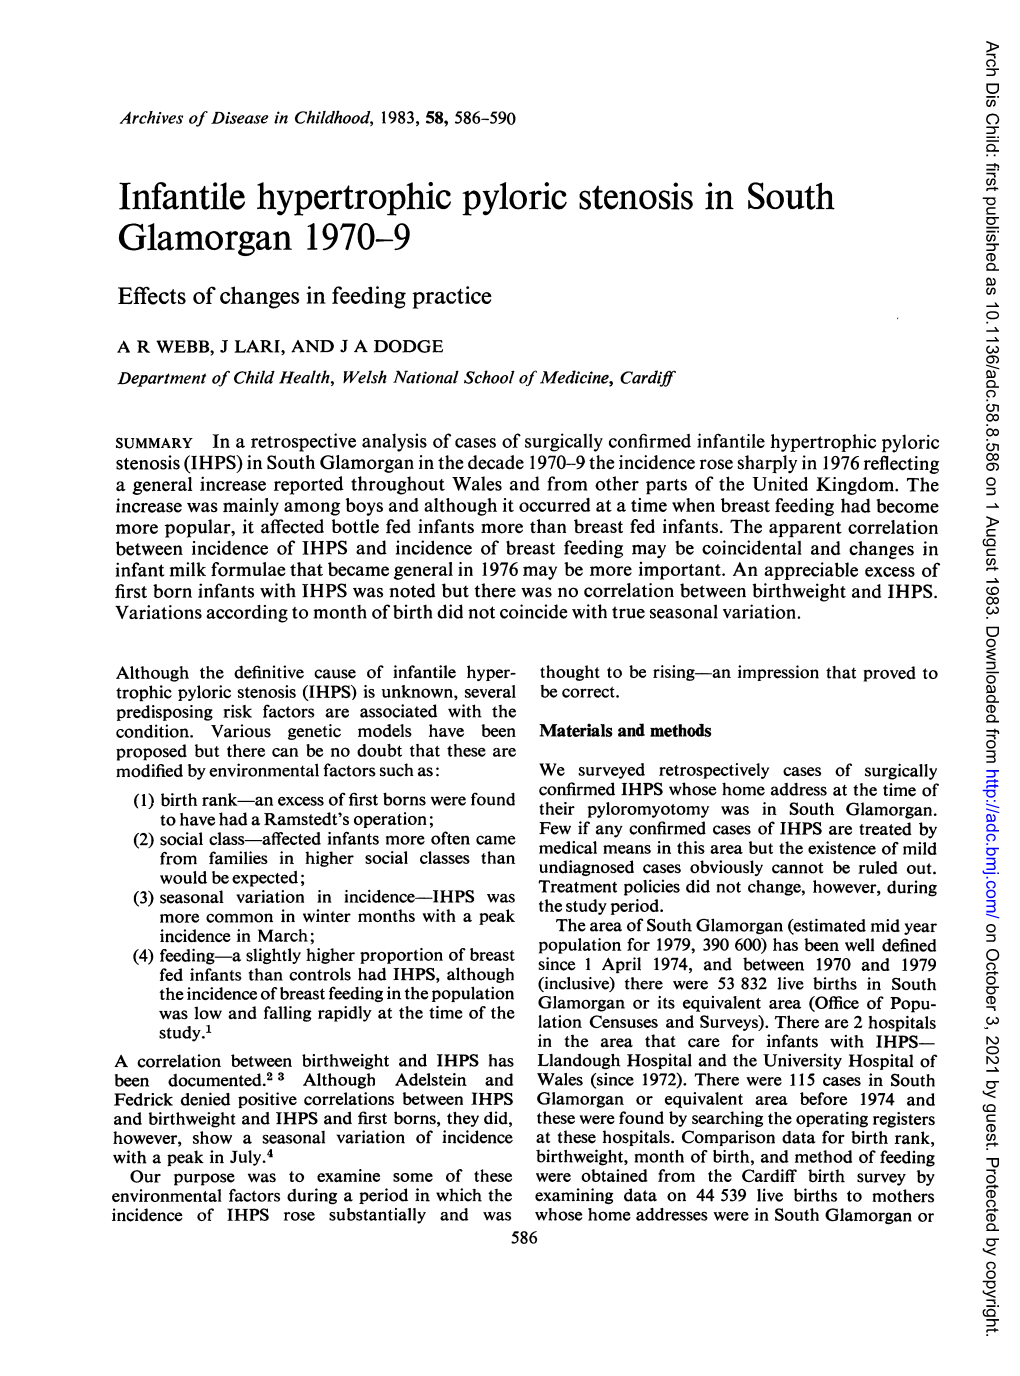 Infantile Hypertrophic Pyloric Stenosis in South Glamorgan 1970-9 Effects of Changes in Feeding Practice